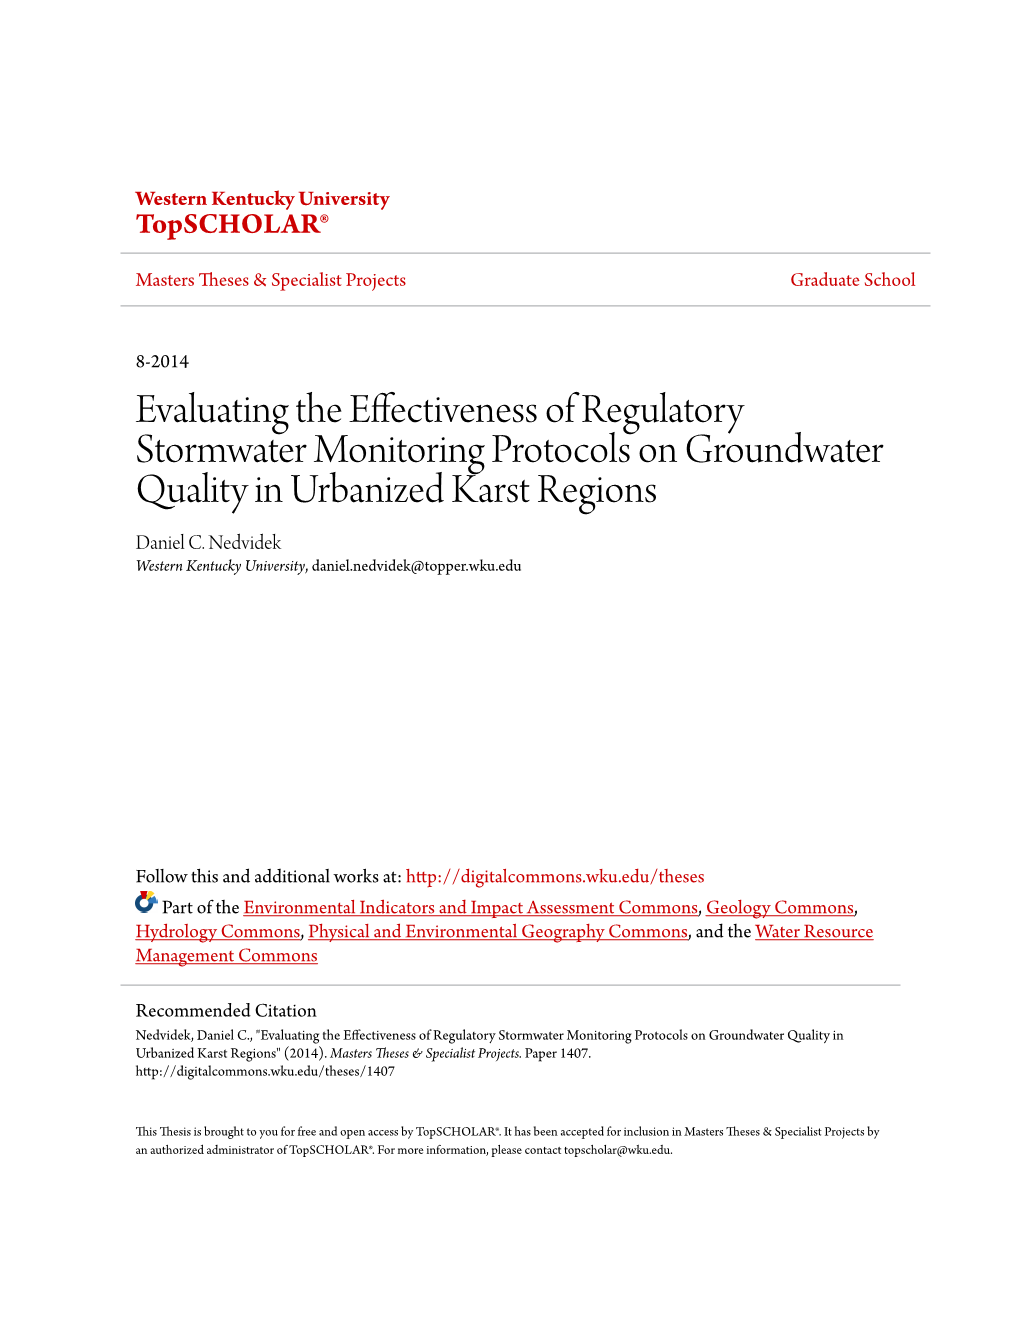 Evaluating the Effectiveness of Regulatory Stormwater Monitoring Protocols on Groundwater Quality in Urbanized Karst Regions Daniel C